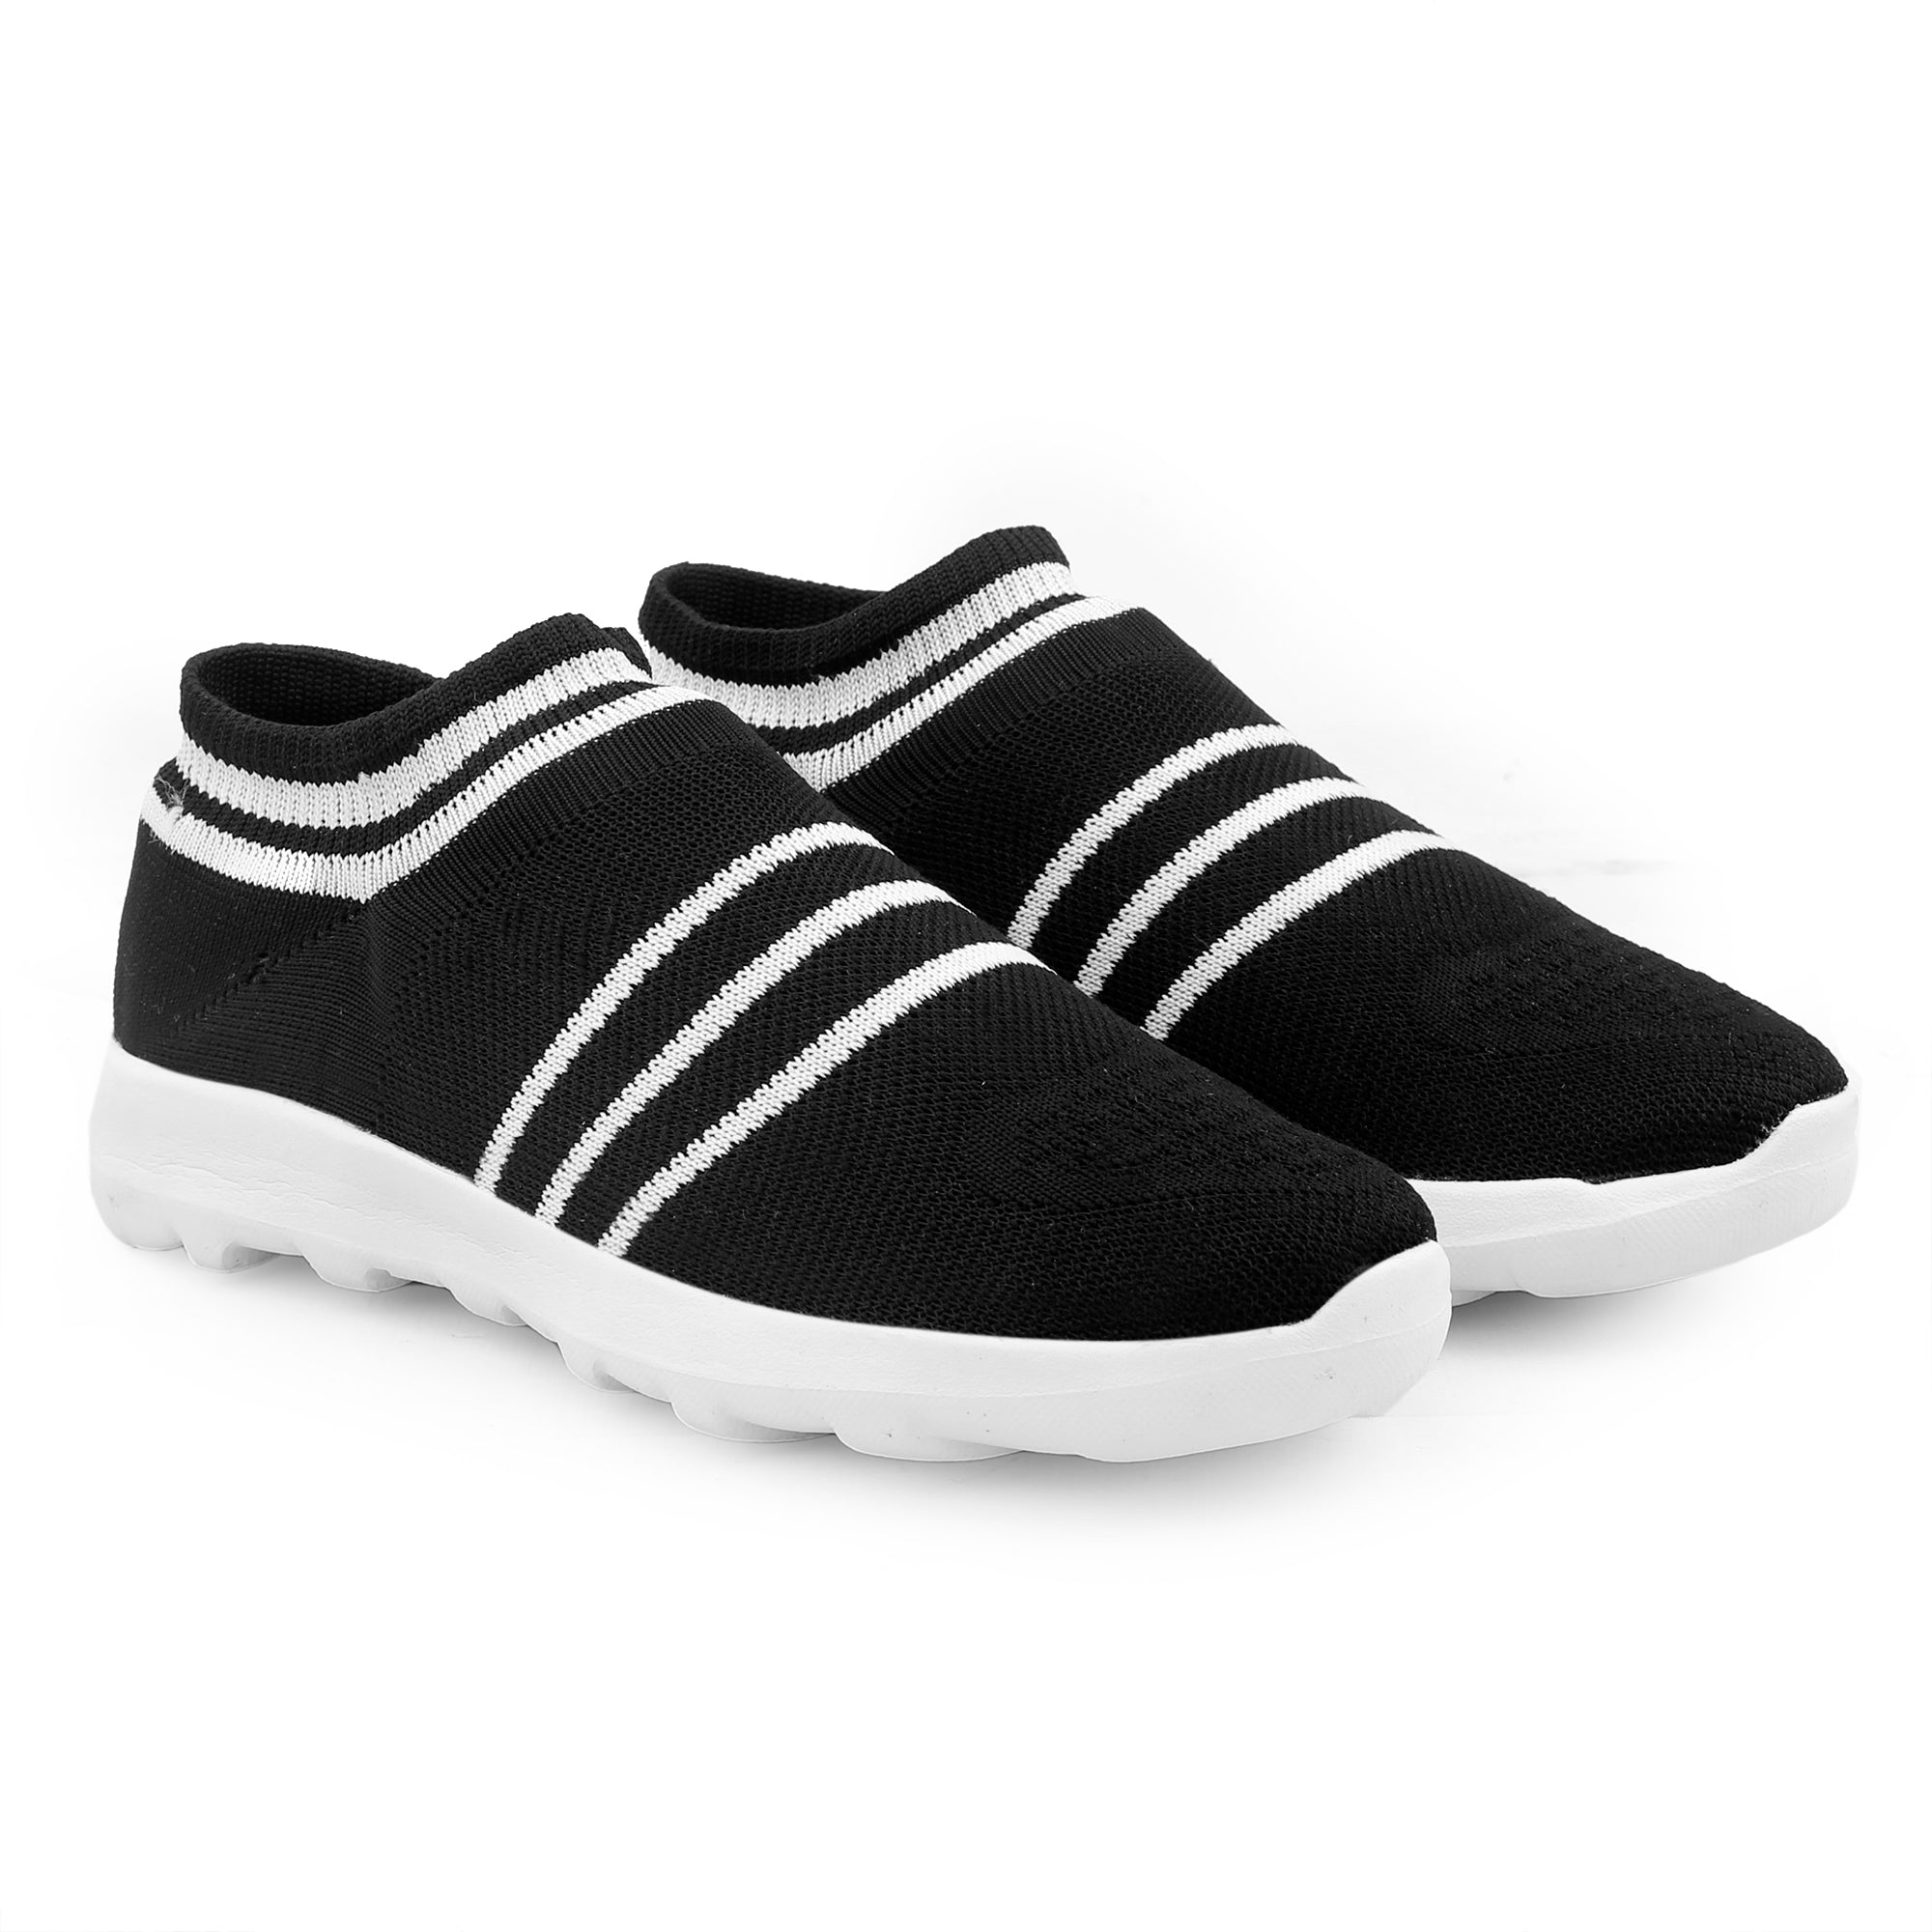 attitudist-black-white-light-weight-all-day-comfy-sports-shoes-for-men-1